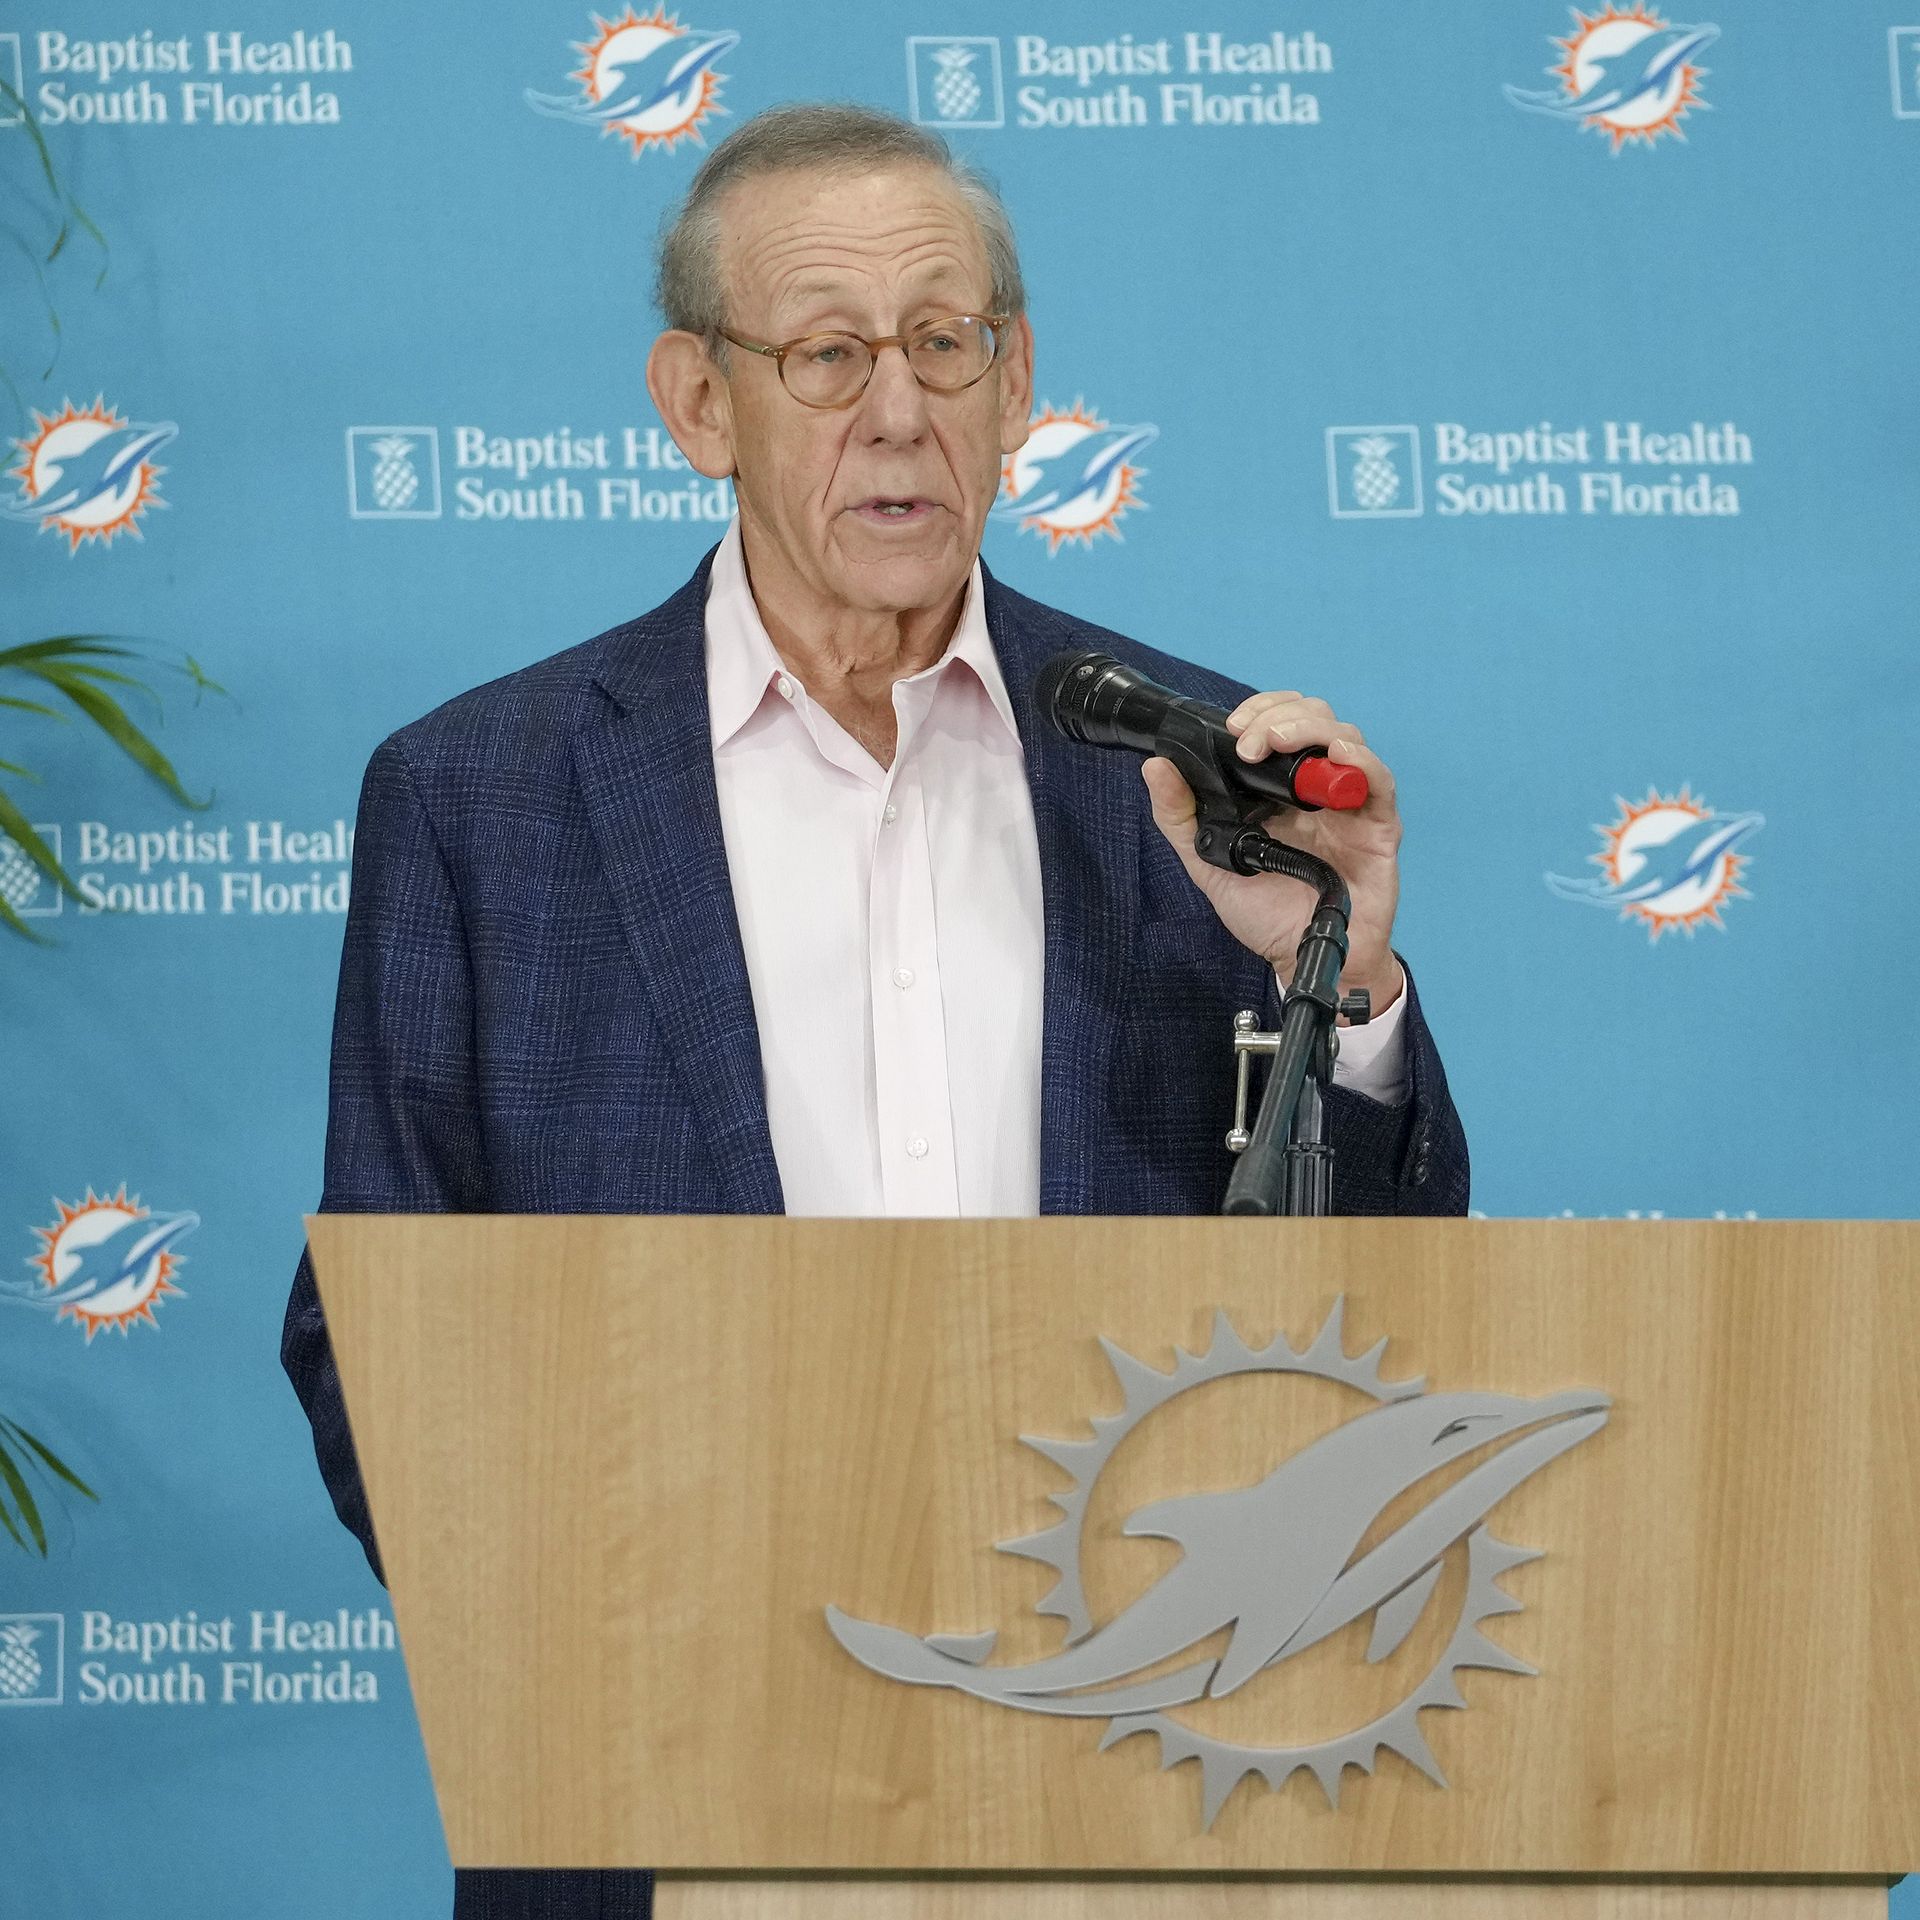 Miami Dolphins owner suspended for tampering with Tom Brady